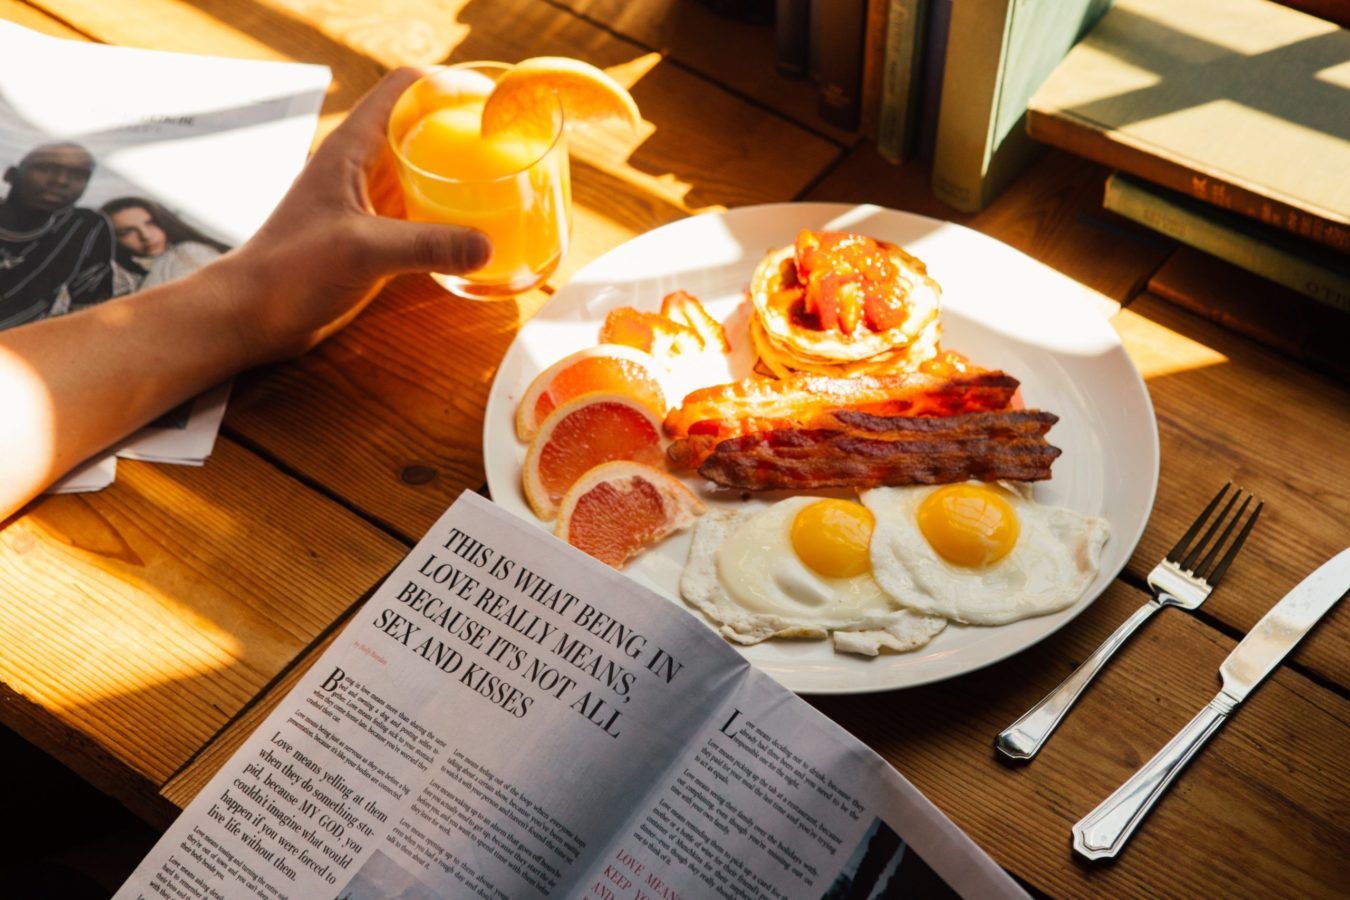 The best time to eat breakfast for weight loss, according to science